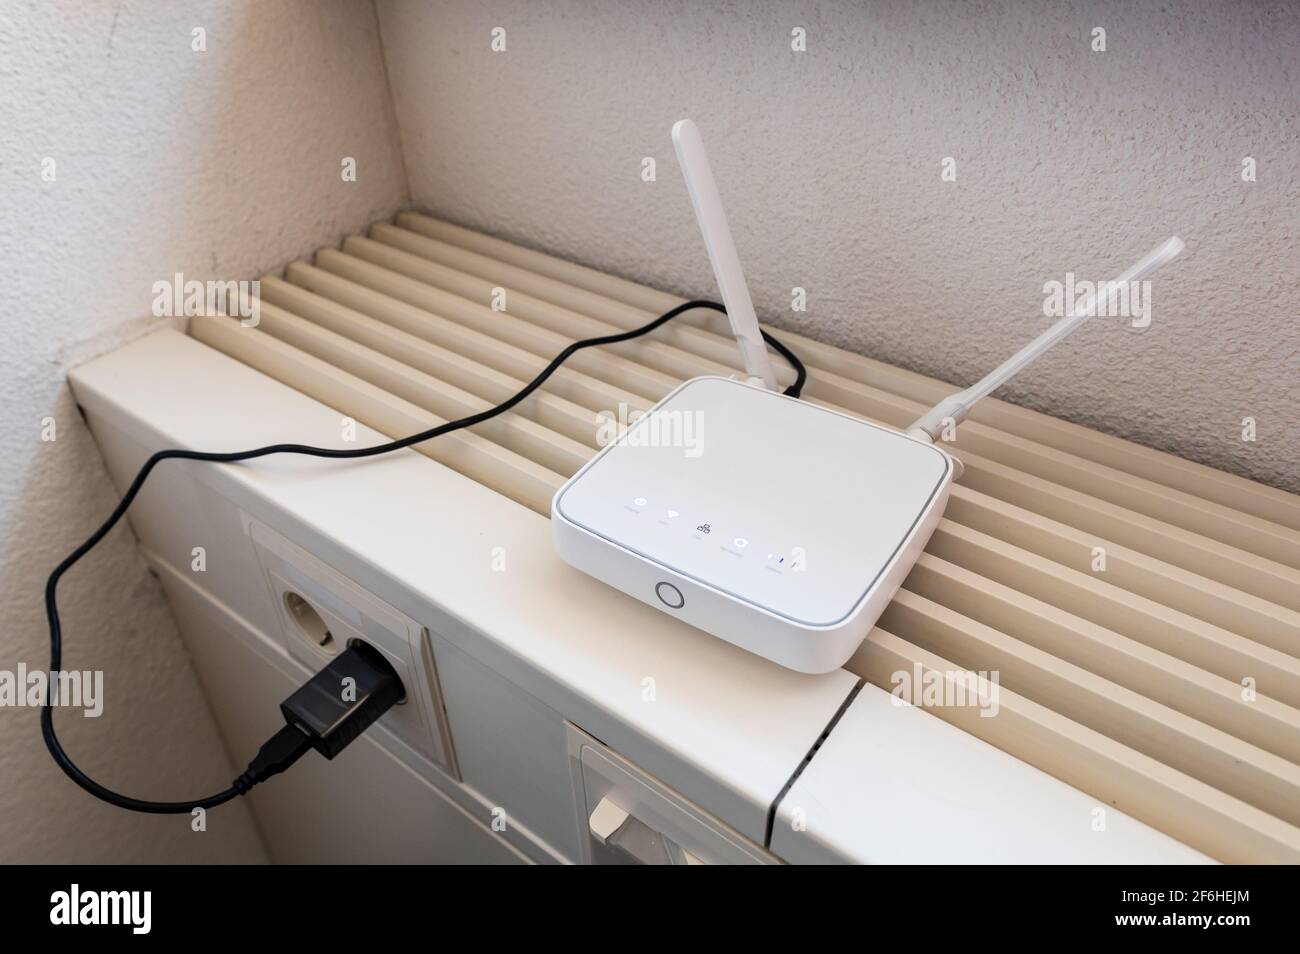 A wifi router on a heater Stock Photo - Alamy